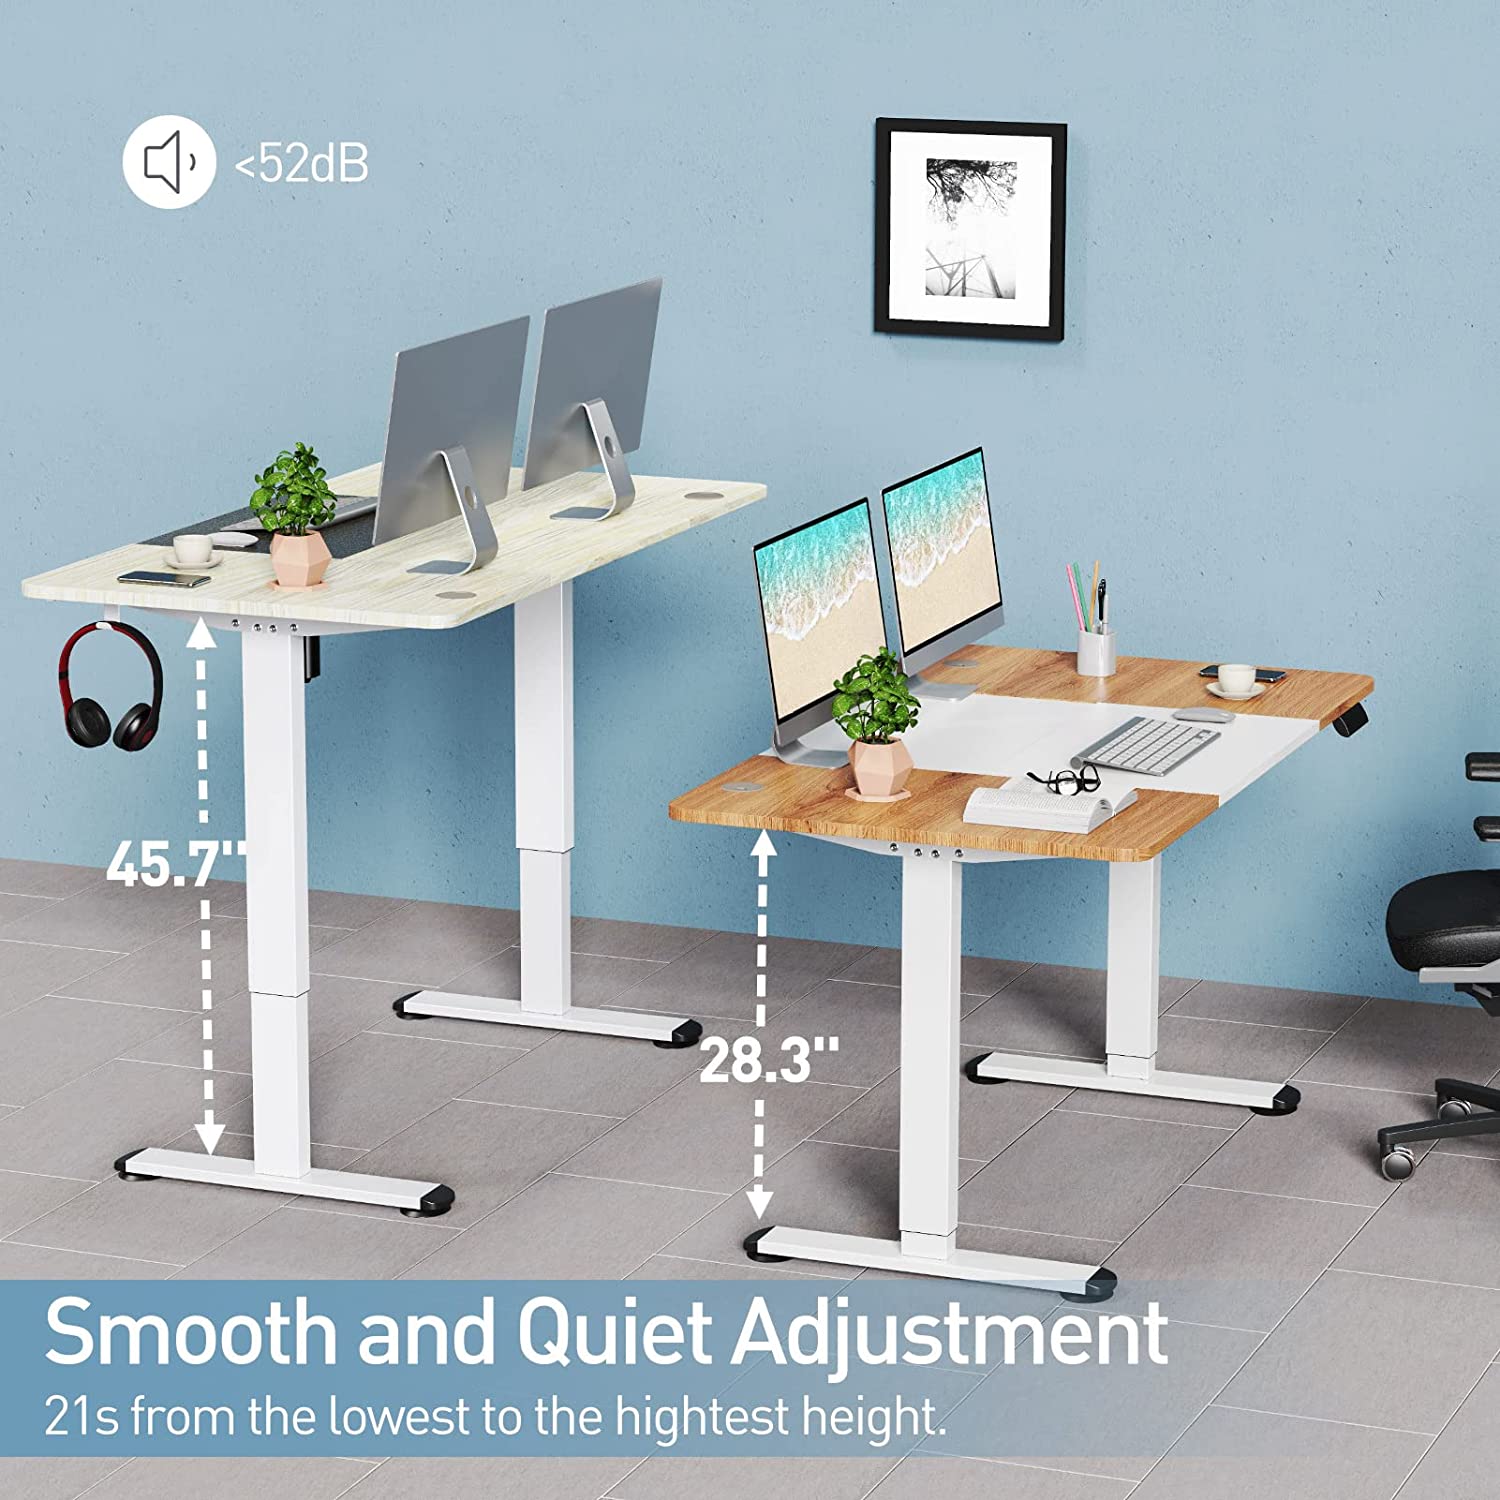 Deep Oak + White adjustable standing desk with height adjustment from 28.3''-45.7''